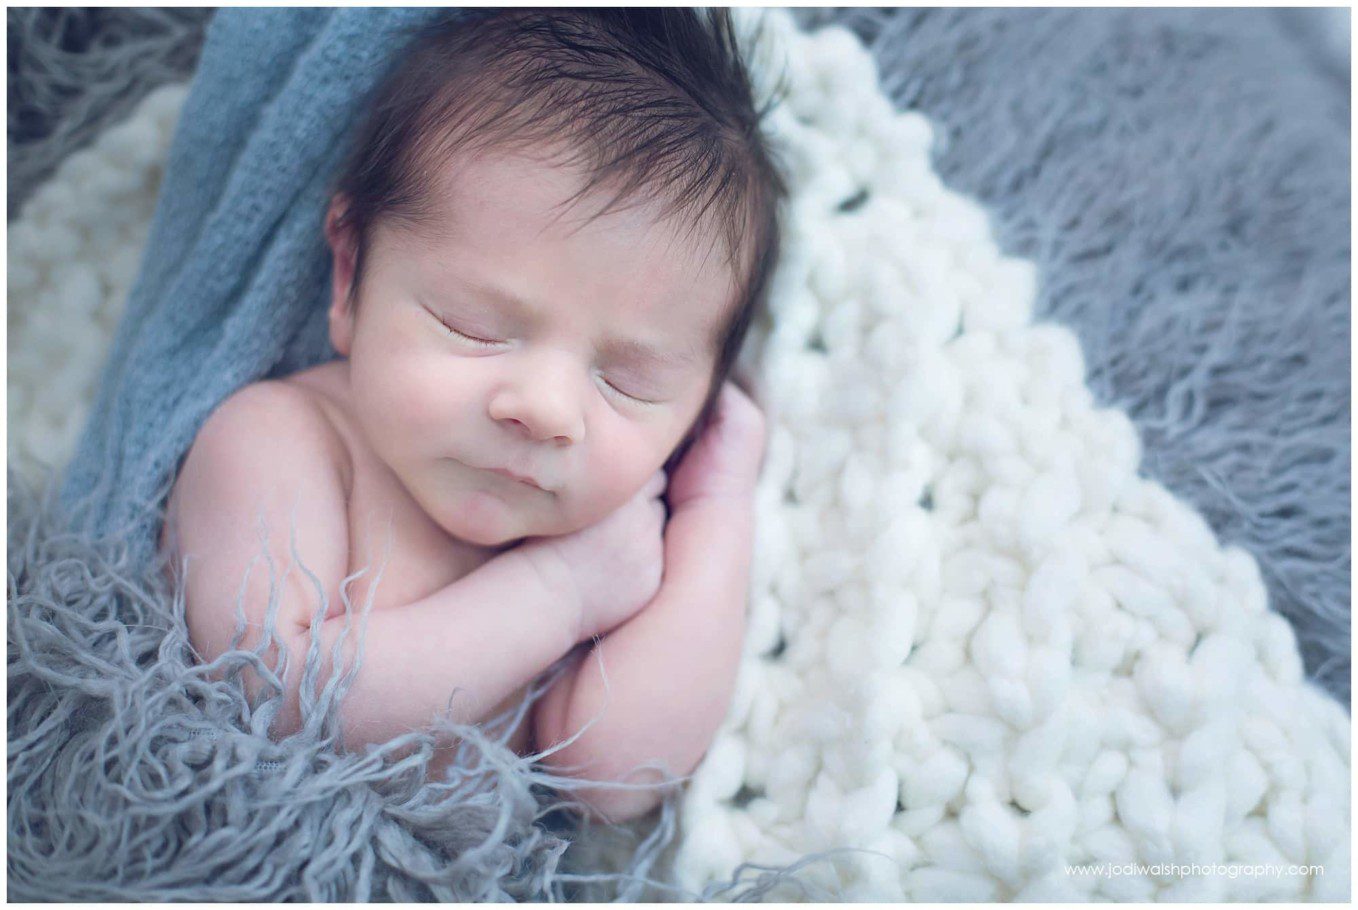 image of a sleeping baby boy. He has a full head of dark hair and is wrapped in blue-gray blankets